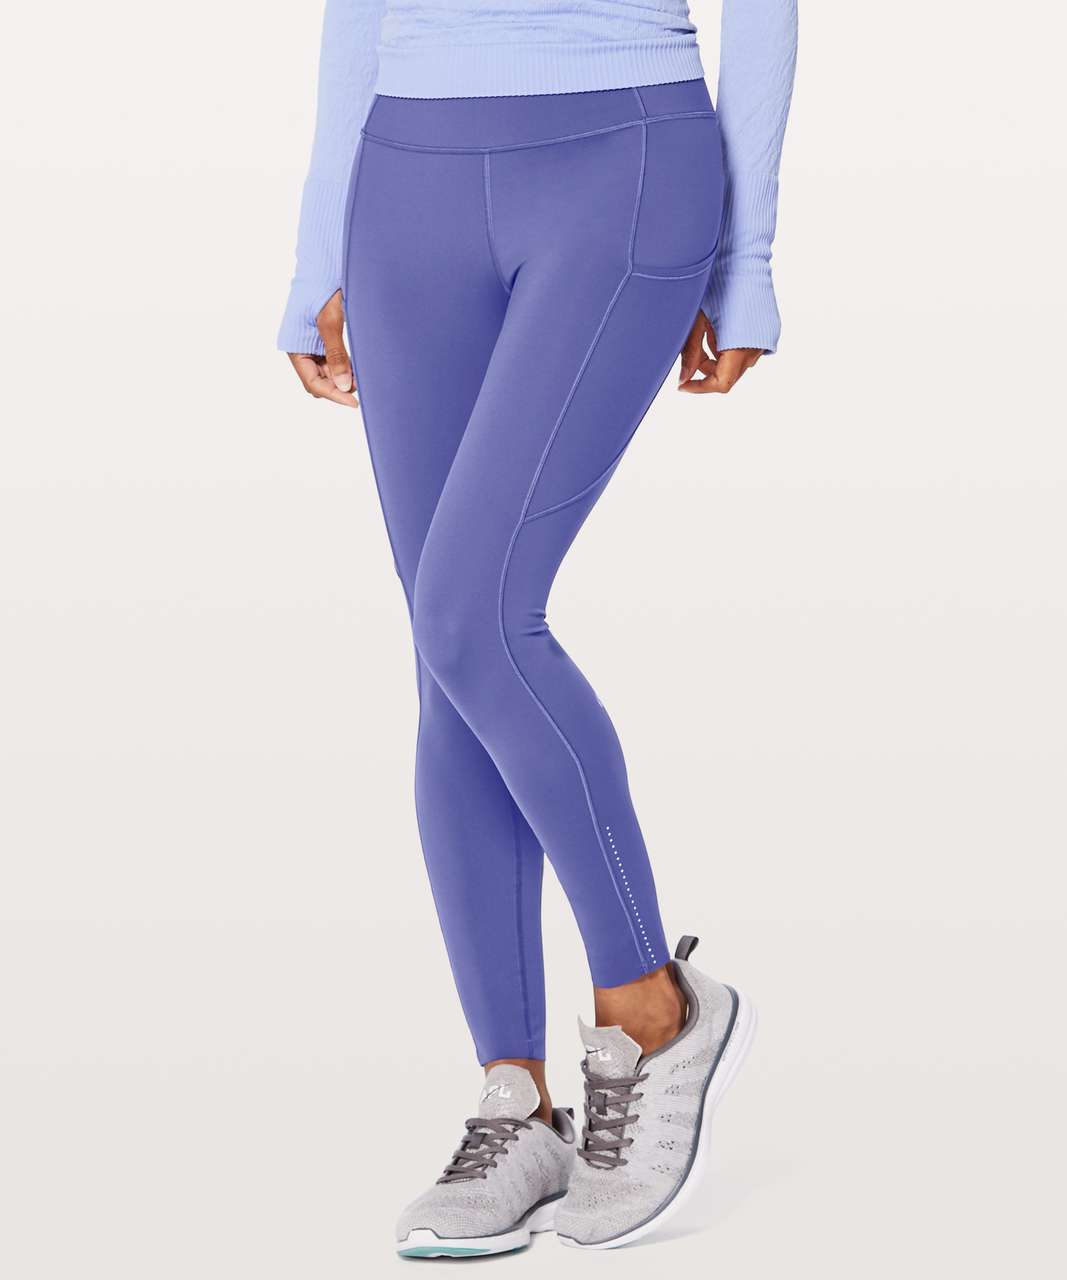 Lululemon Fast and Free Tight 25 *Nulux City Grit White Blue Fog